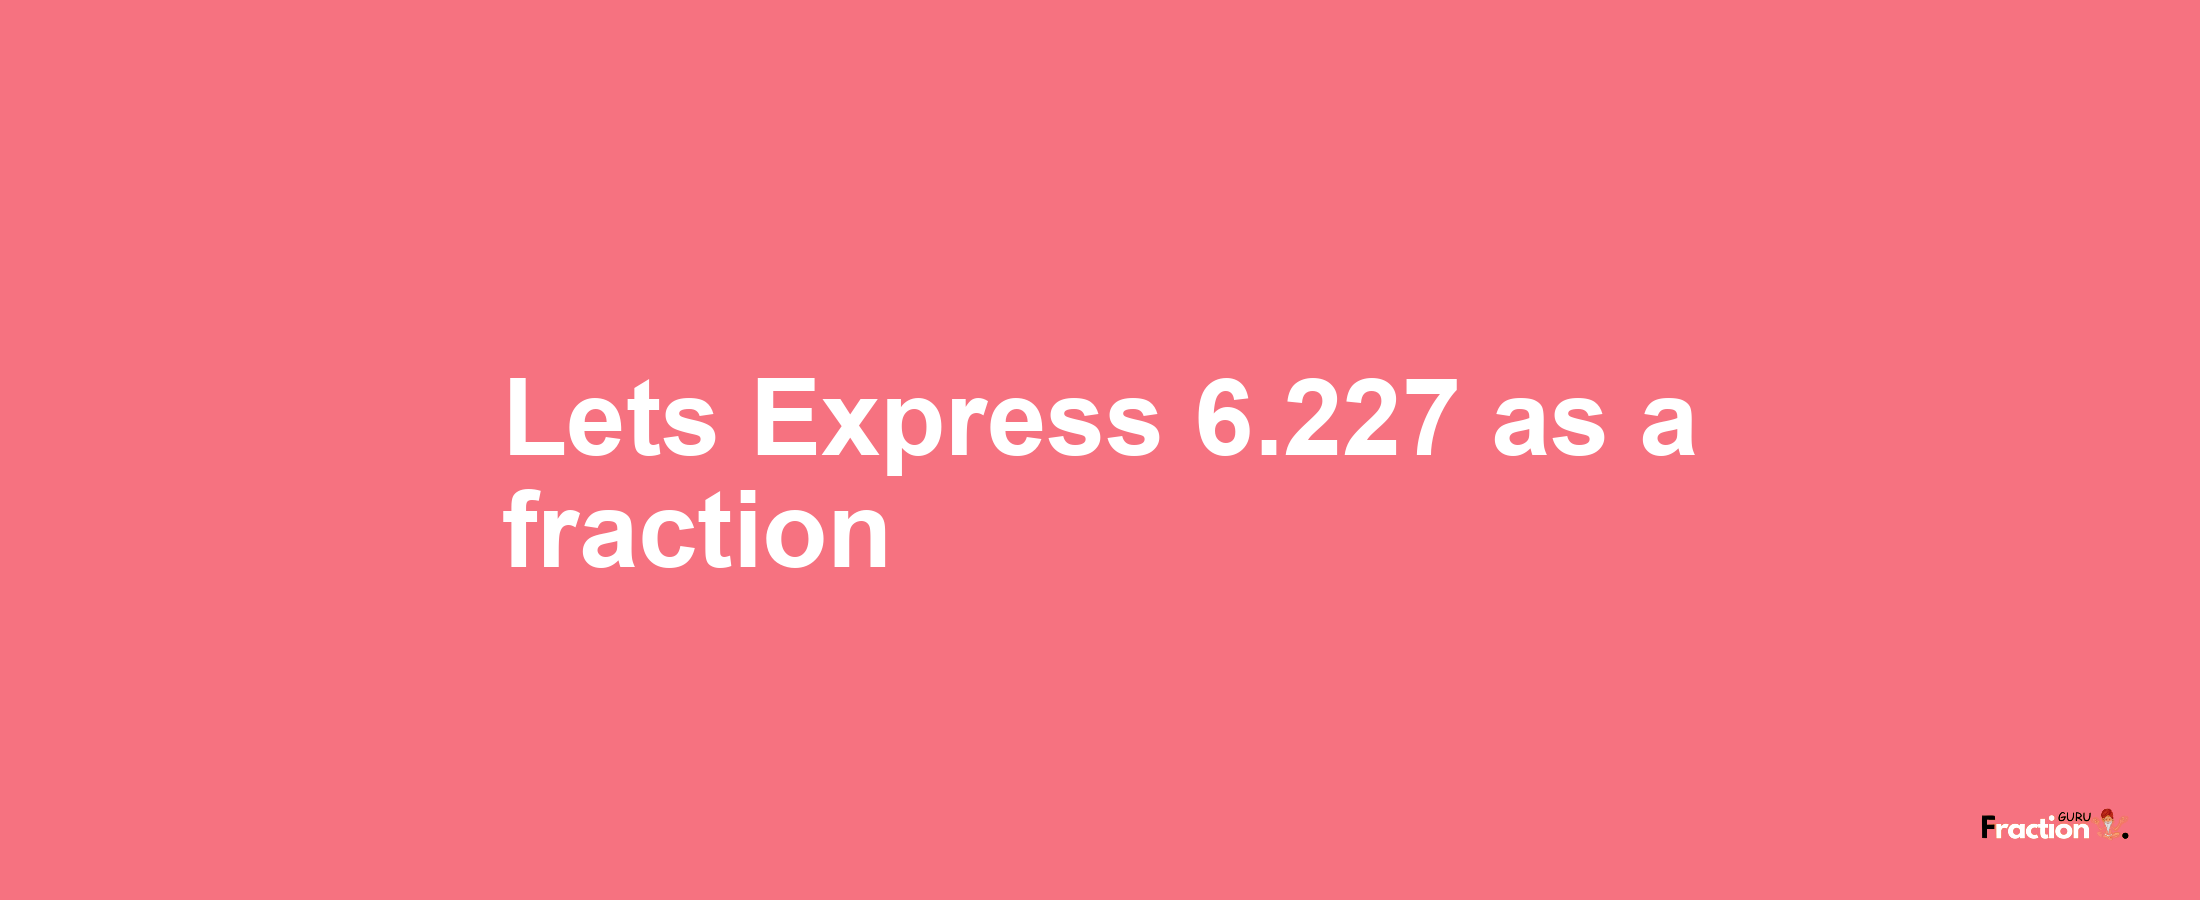 Lets Express 6.227 as afraction